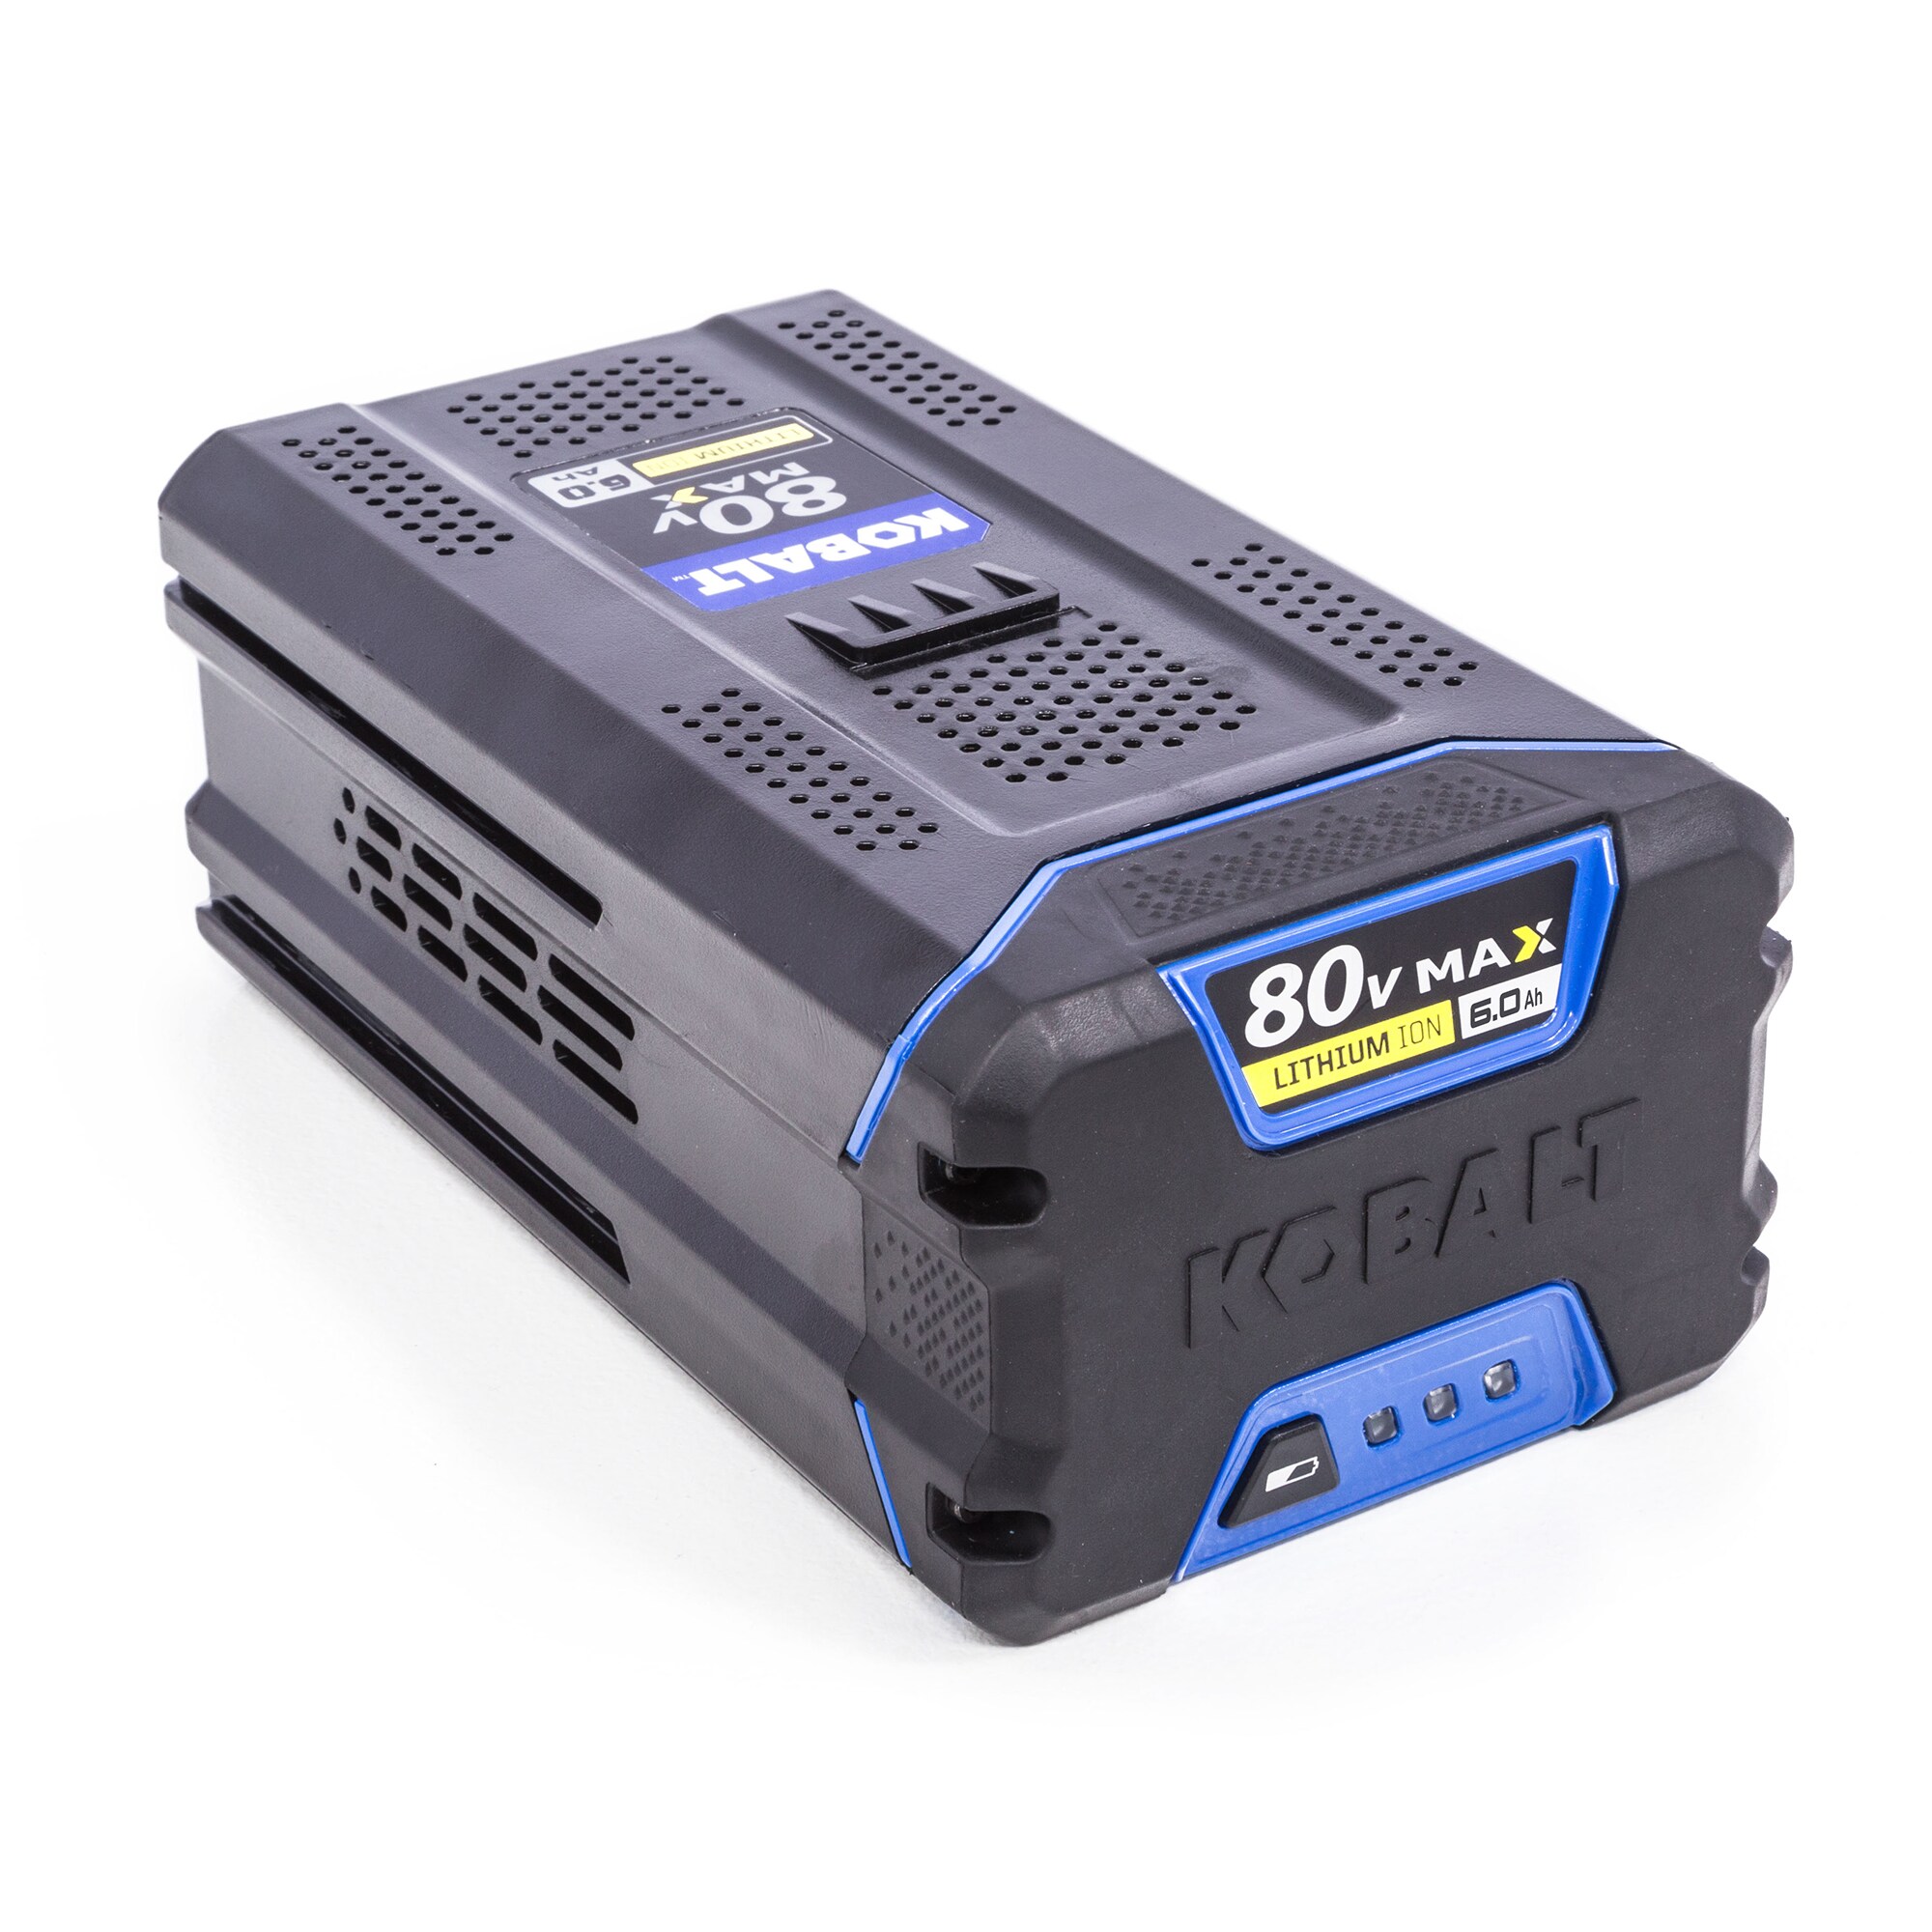 NEW KOBALT 80v MAX 6.0Ah LITHIUM-ION BATTERY ONLY KB680-06  Free Shipping 